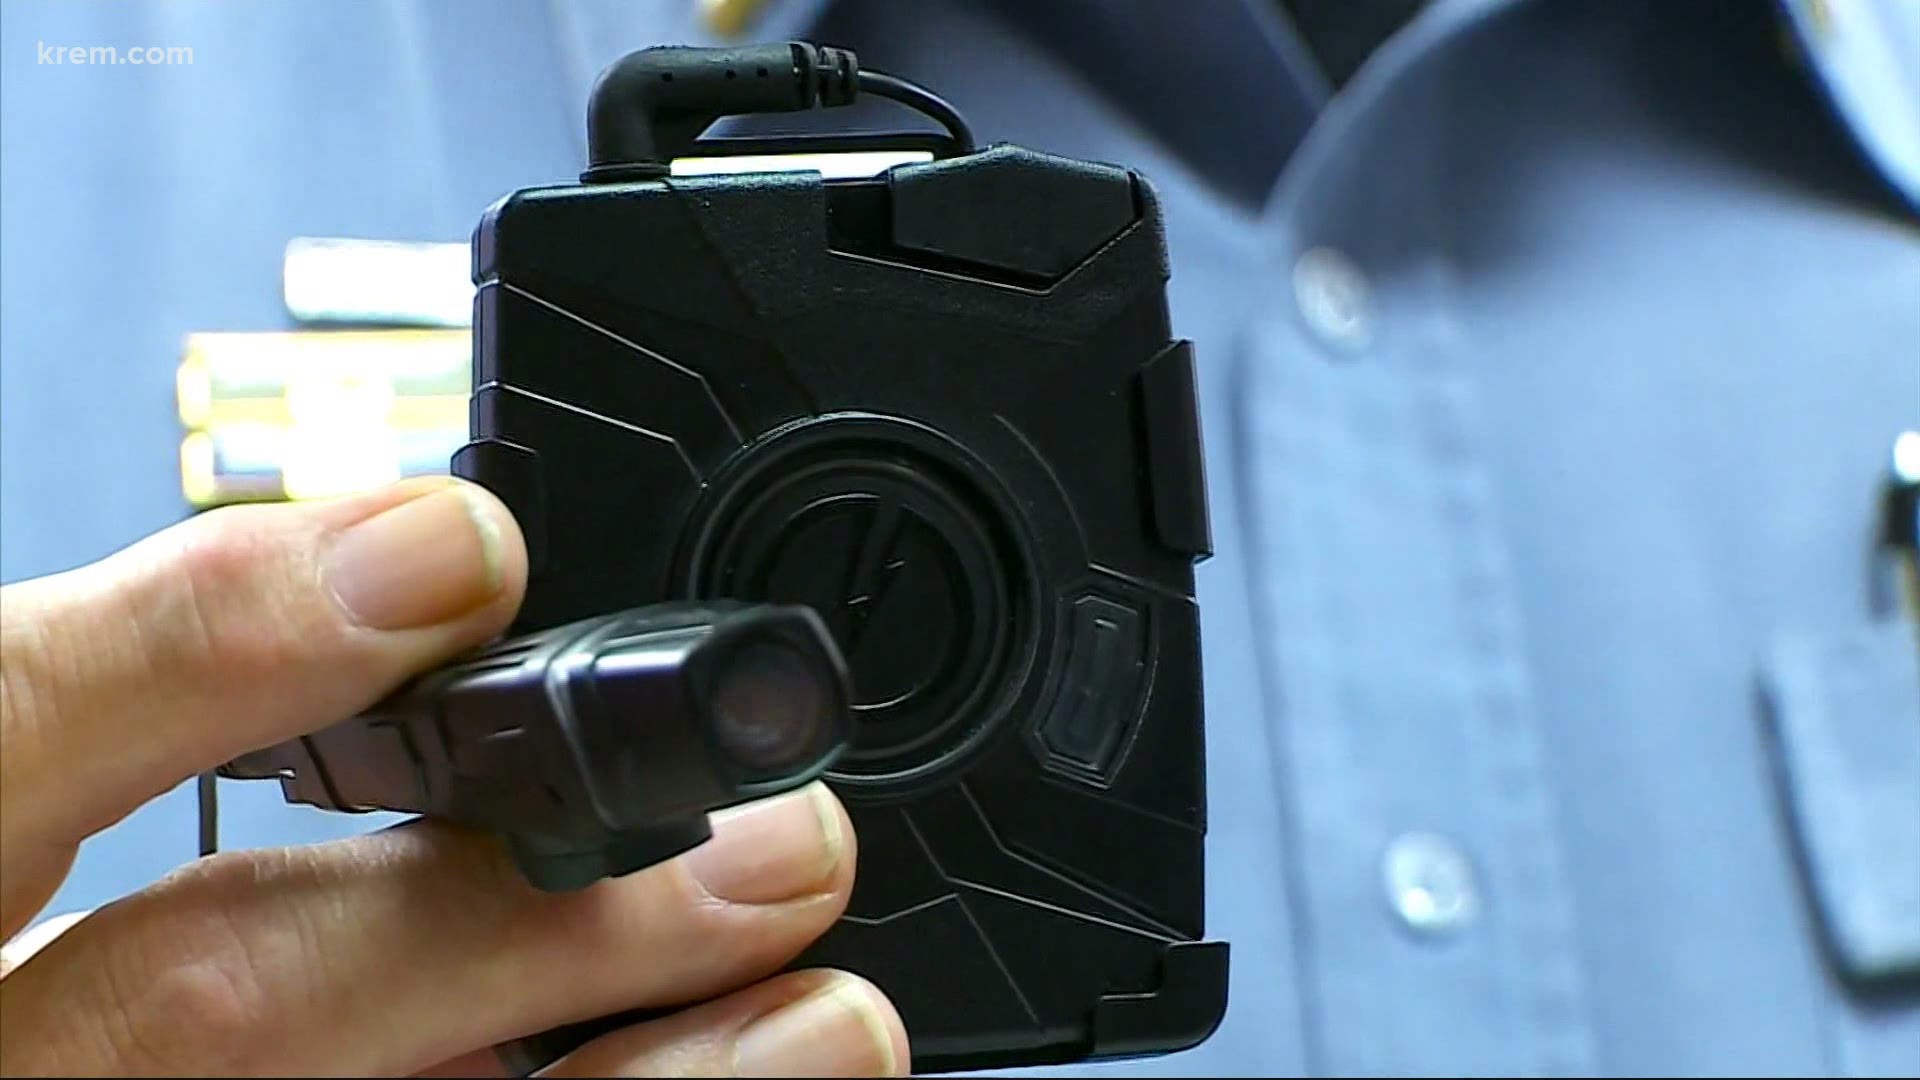 For years the Spokane Police Department has worn body cameras, but the Spokane County Sheriff's Office has gone without.